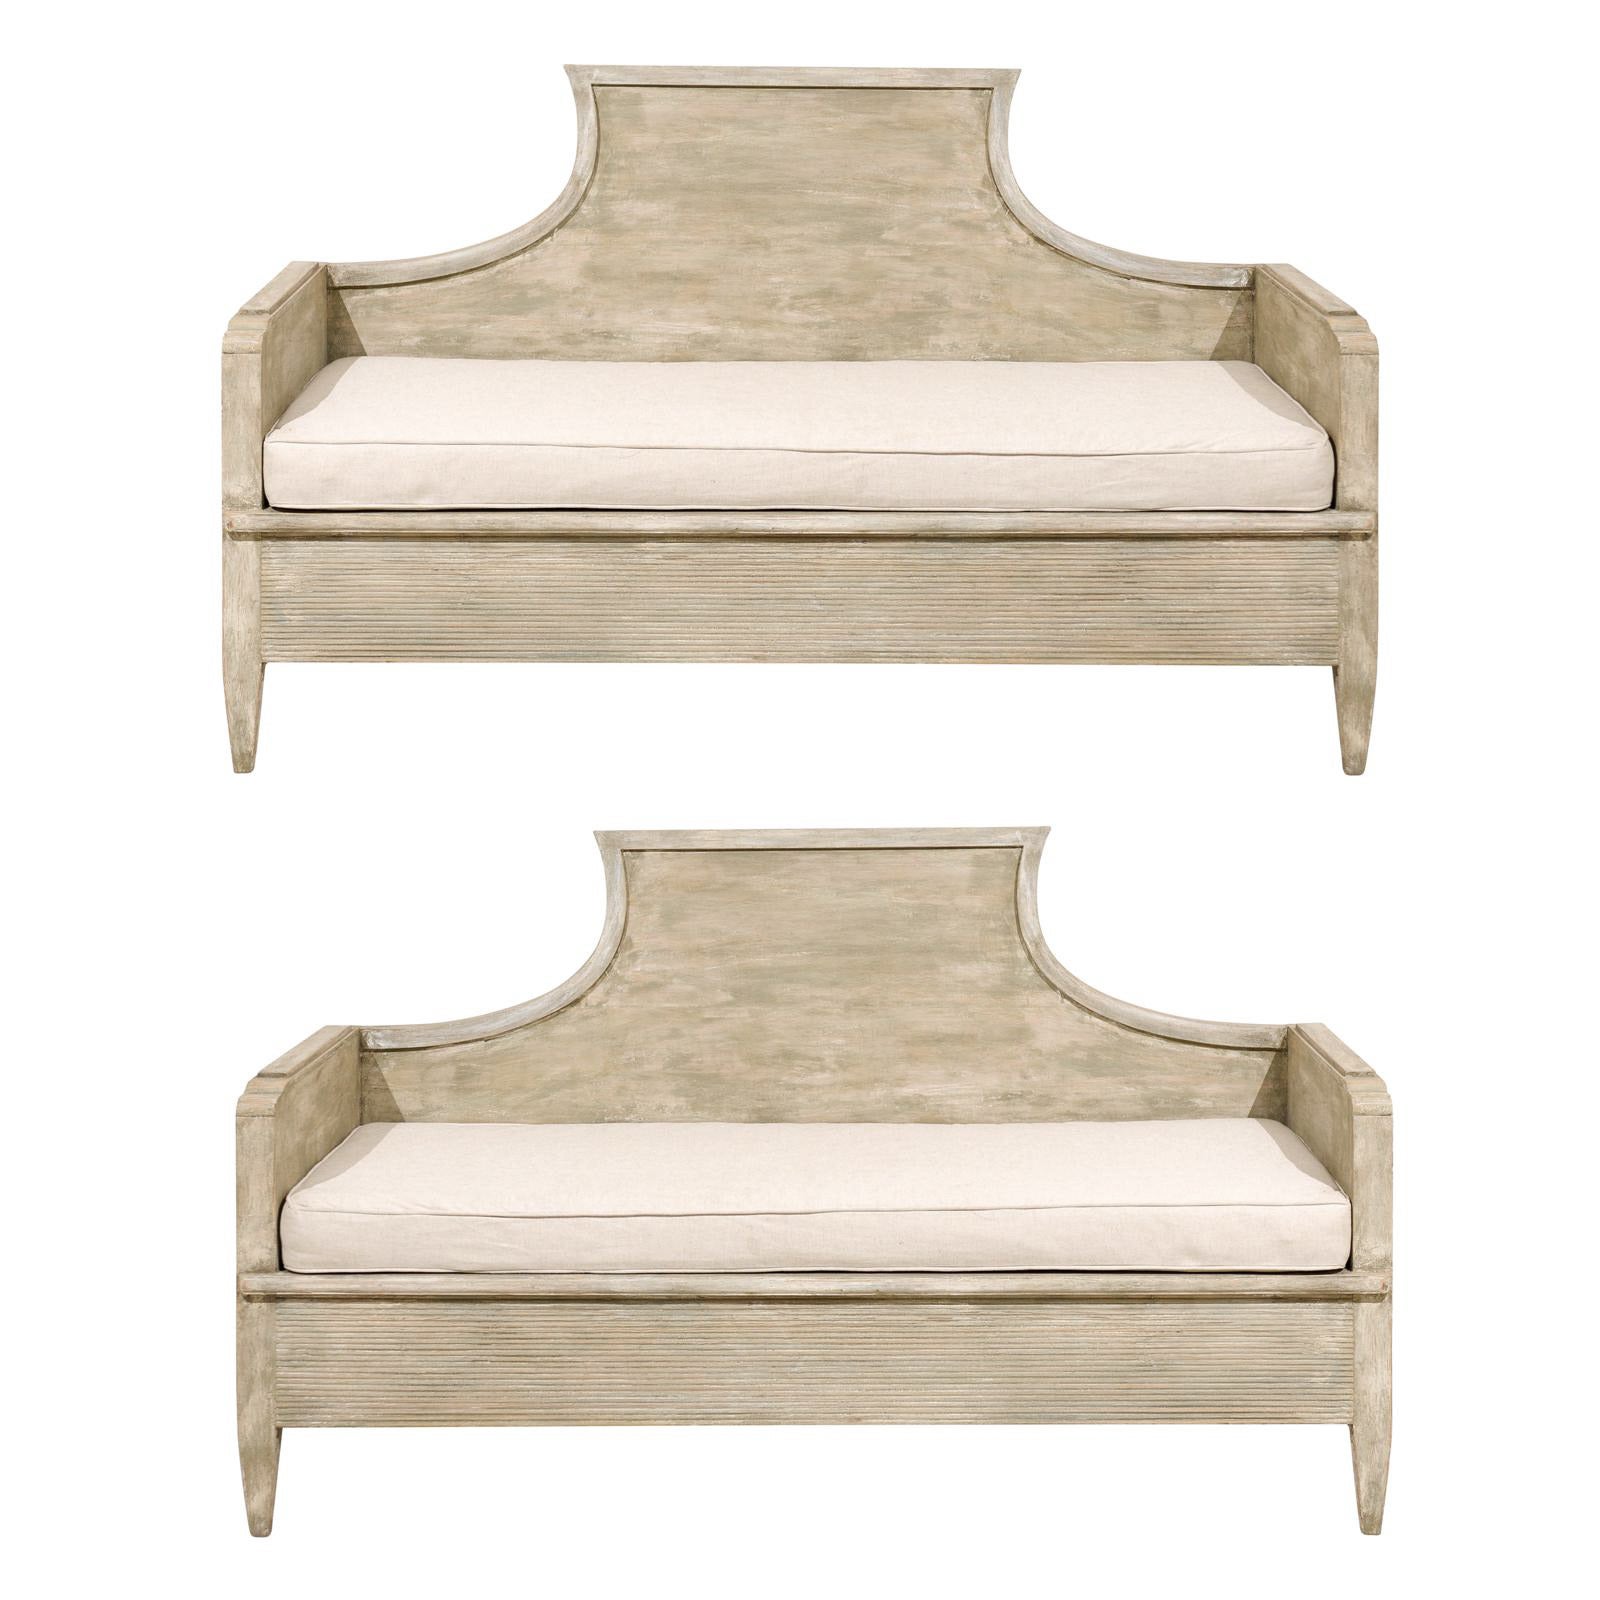 A Pair of Early 19th Century Swedish Period Gustavian Painted Wood Sofas